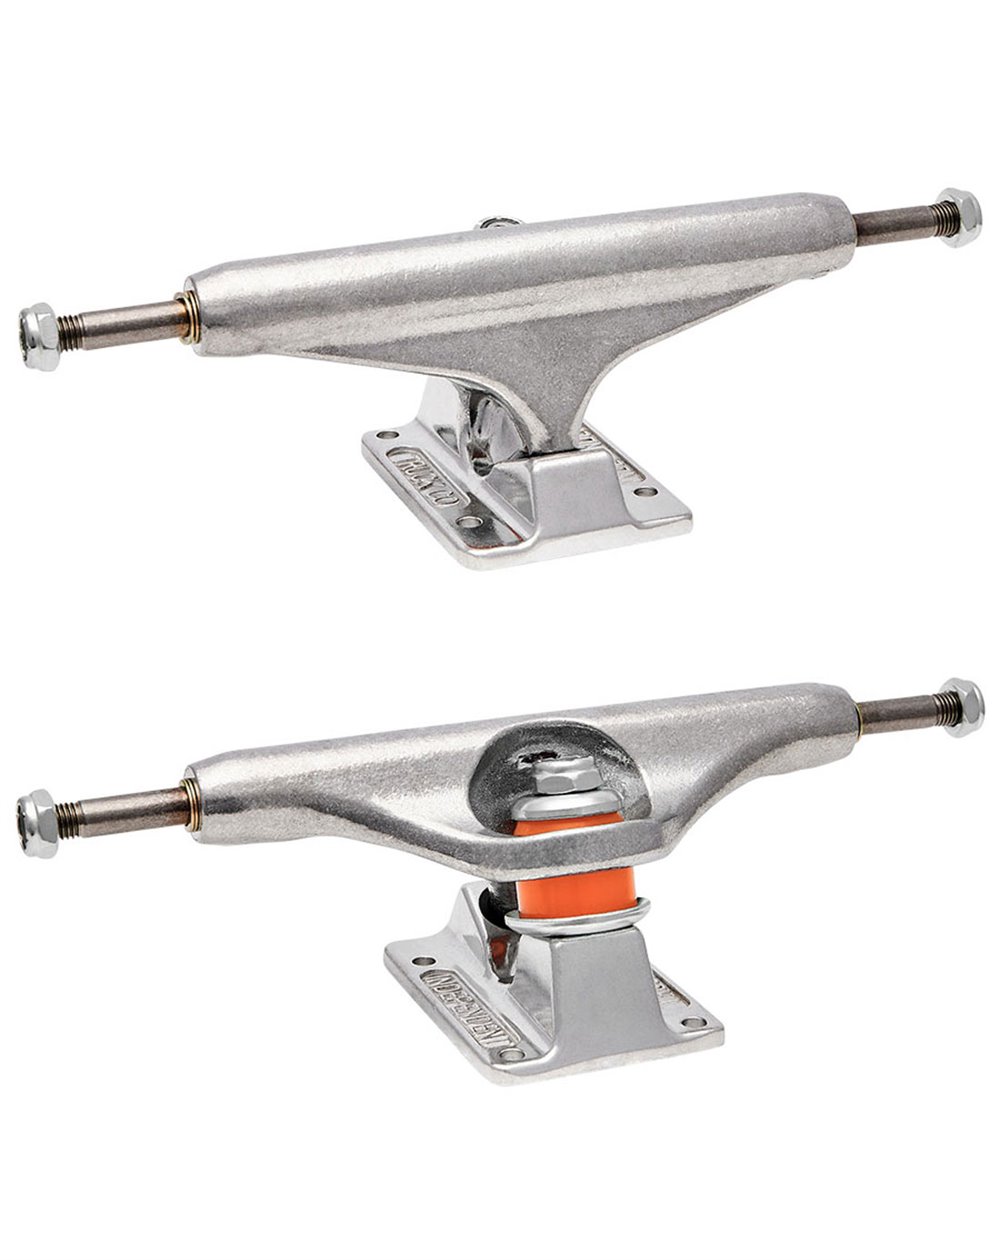 Independent Stage XI Forged Titanium 144mm Skateboard Trucks pack of 2